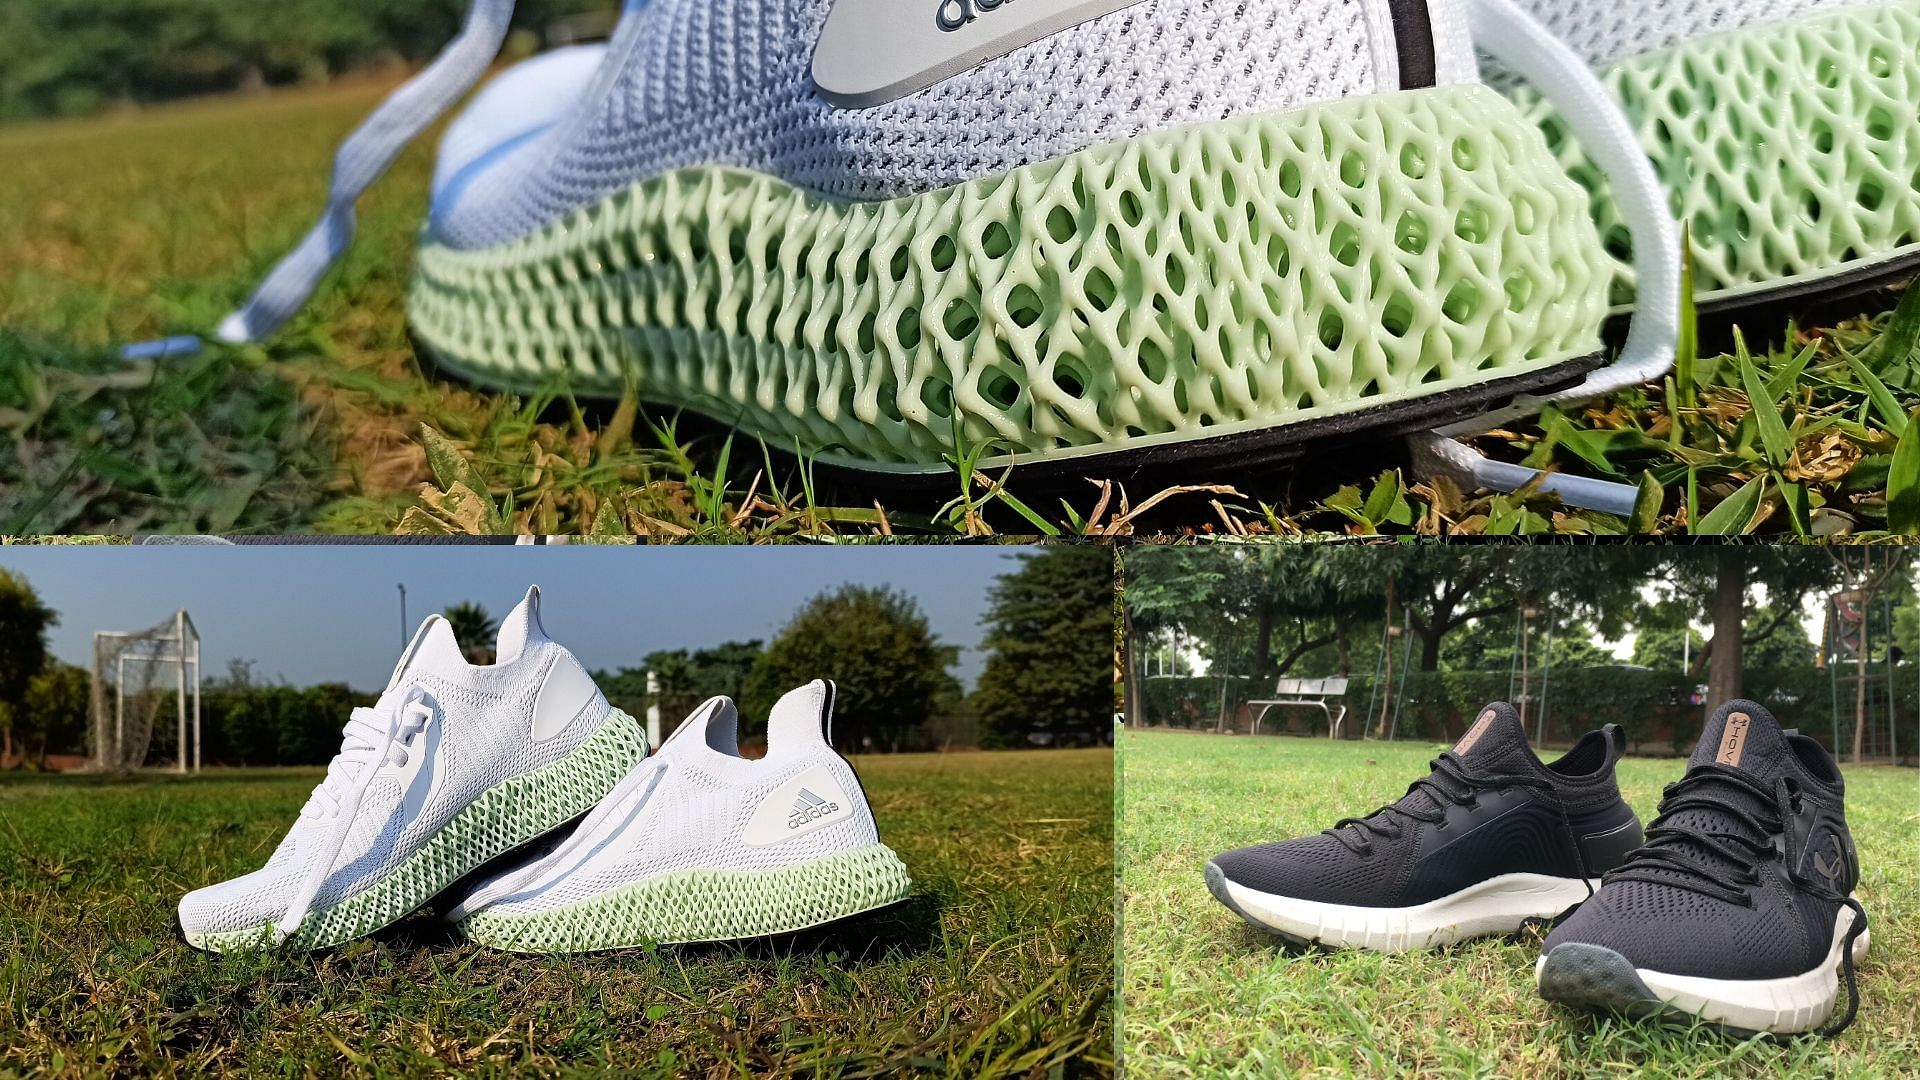 Adidas has launched 3D-printed shoes in the Indian market.